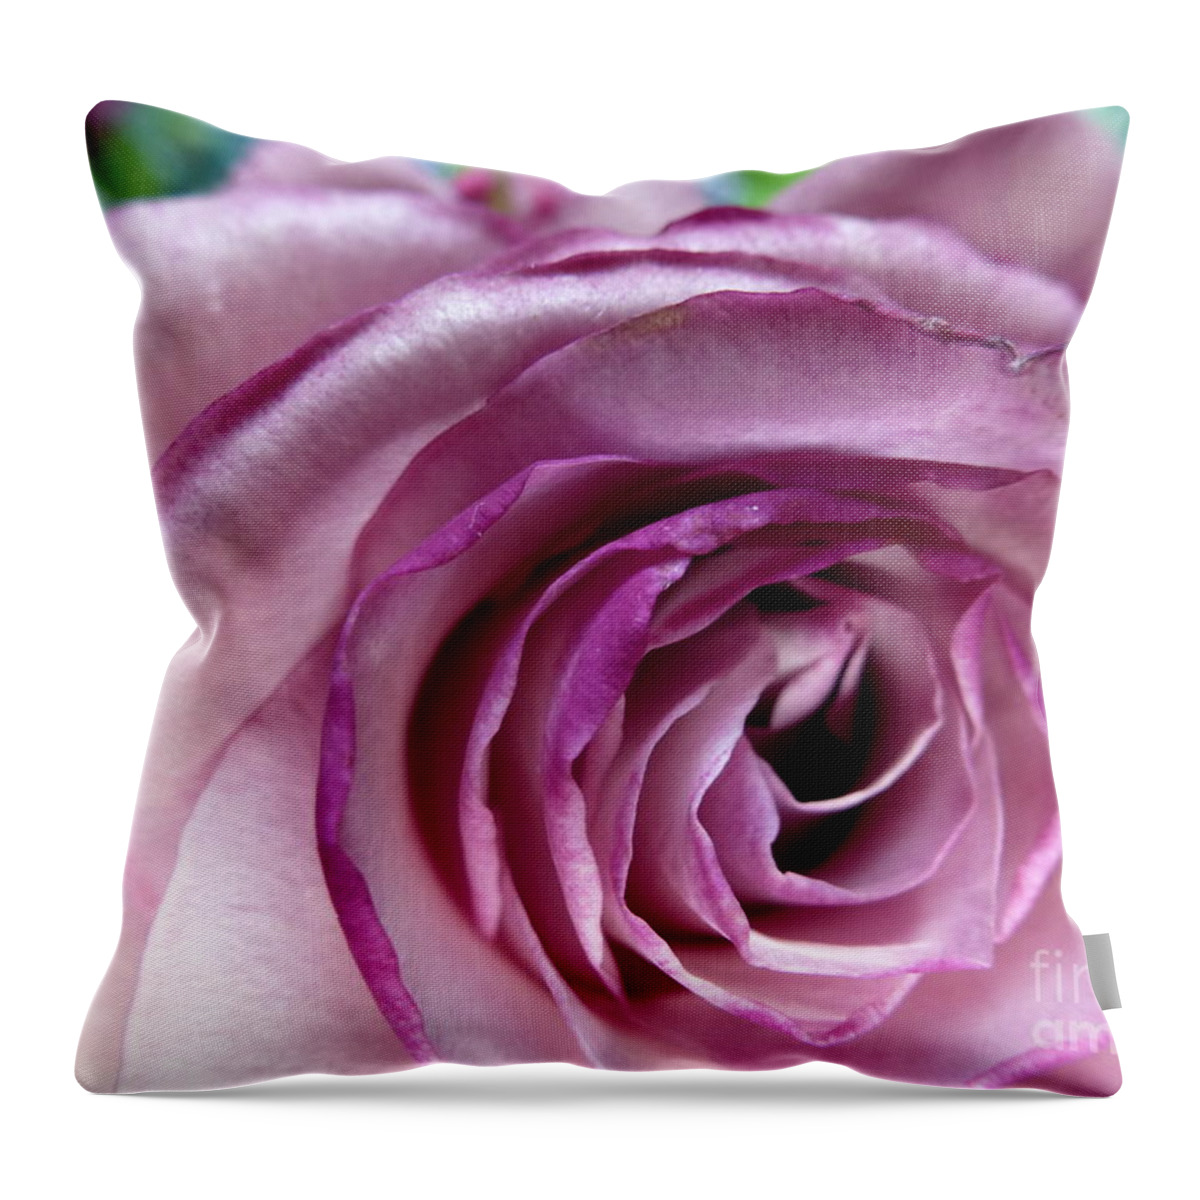  Throw Pillow featuring the photograph Rose Neptune by Mars Besso